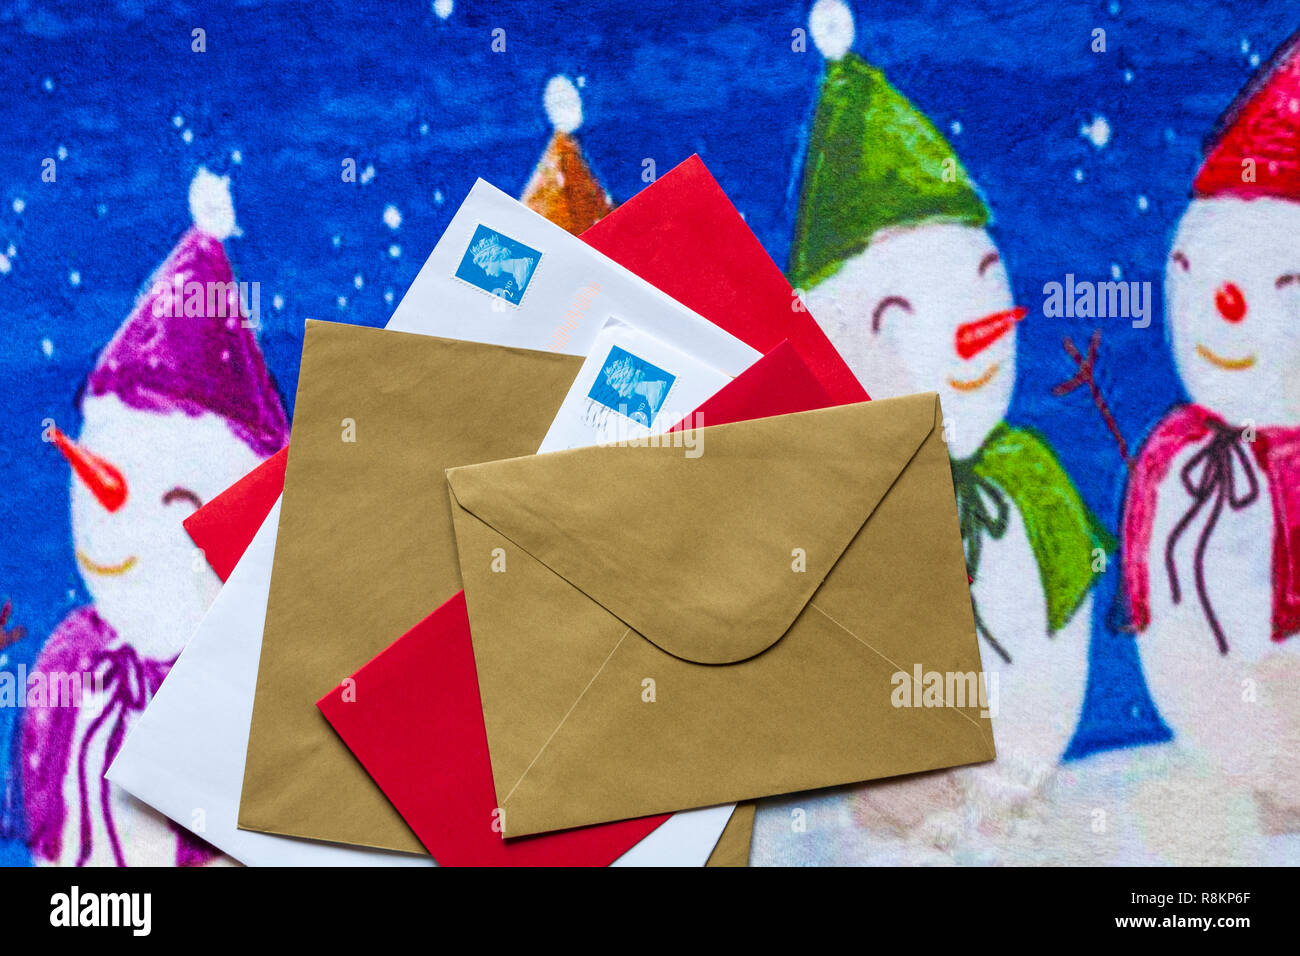 Envelopes, mail post, Christmas cards, on Christmas door mat Stock Photo